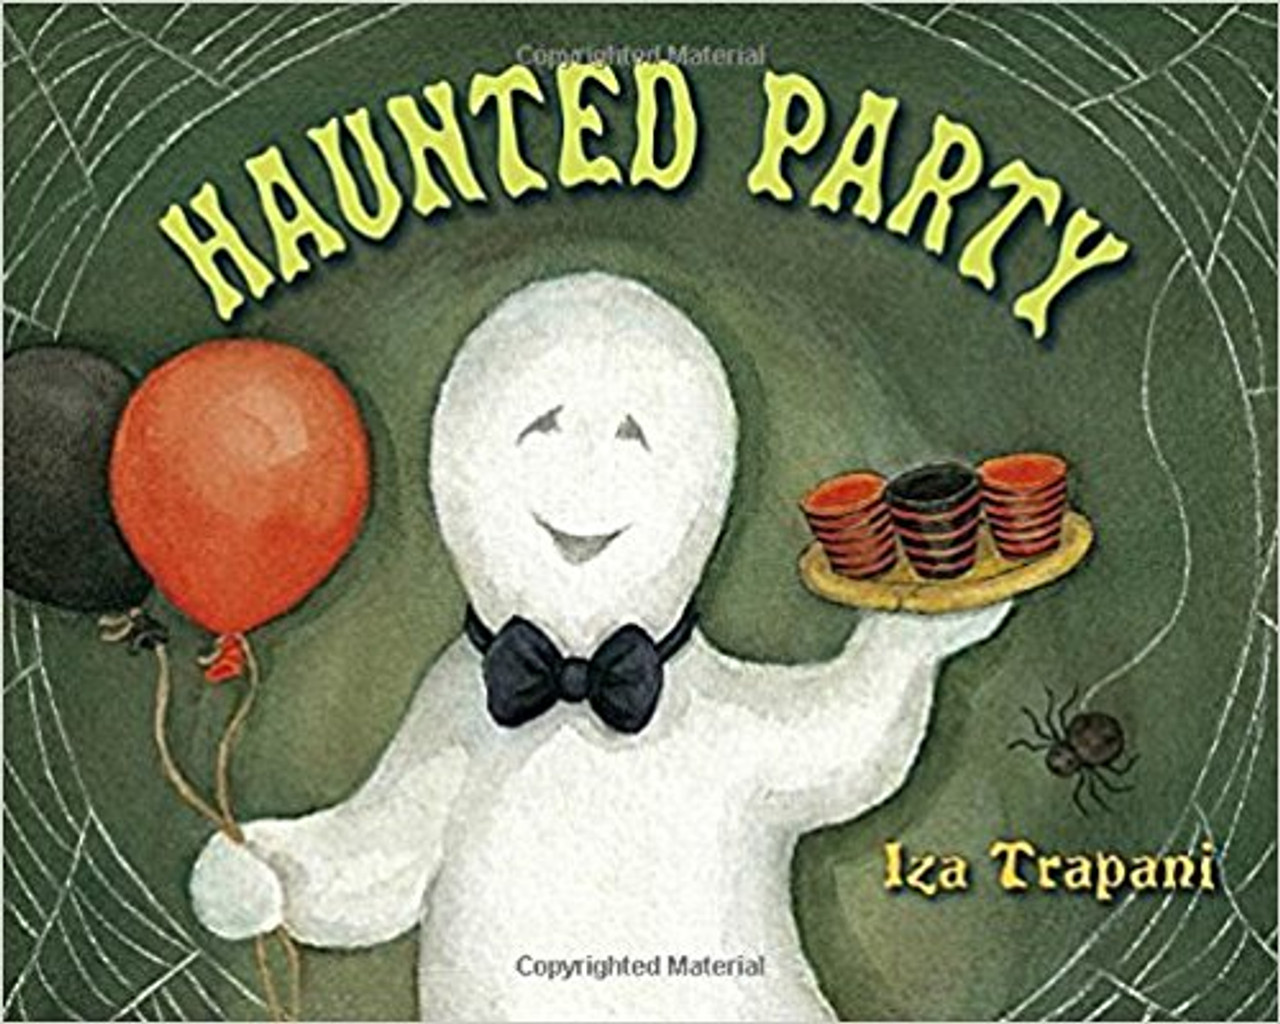 This humorous, rhyming book invites readers to count eerie party guests(1-10) as they arrive at the haunted house of the ghost.